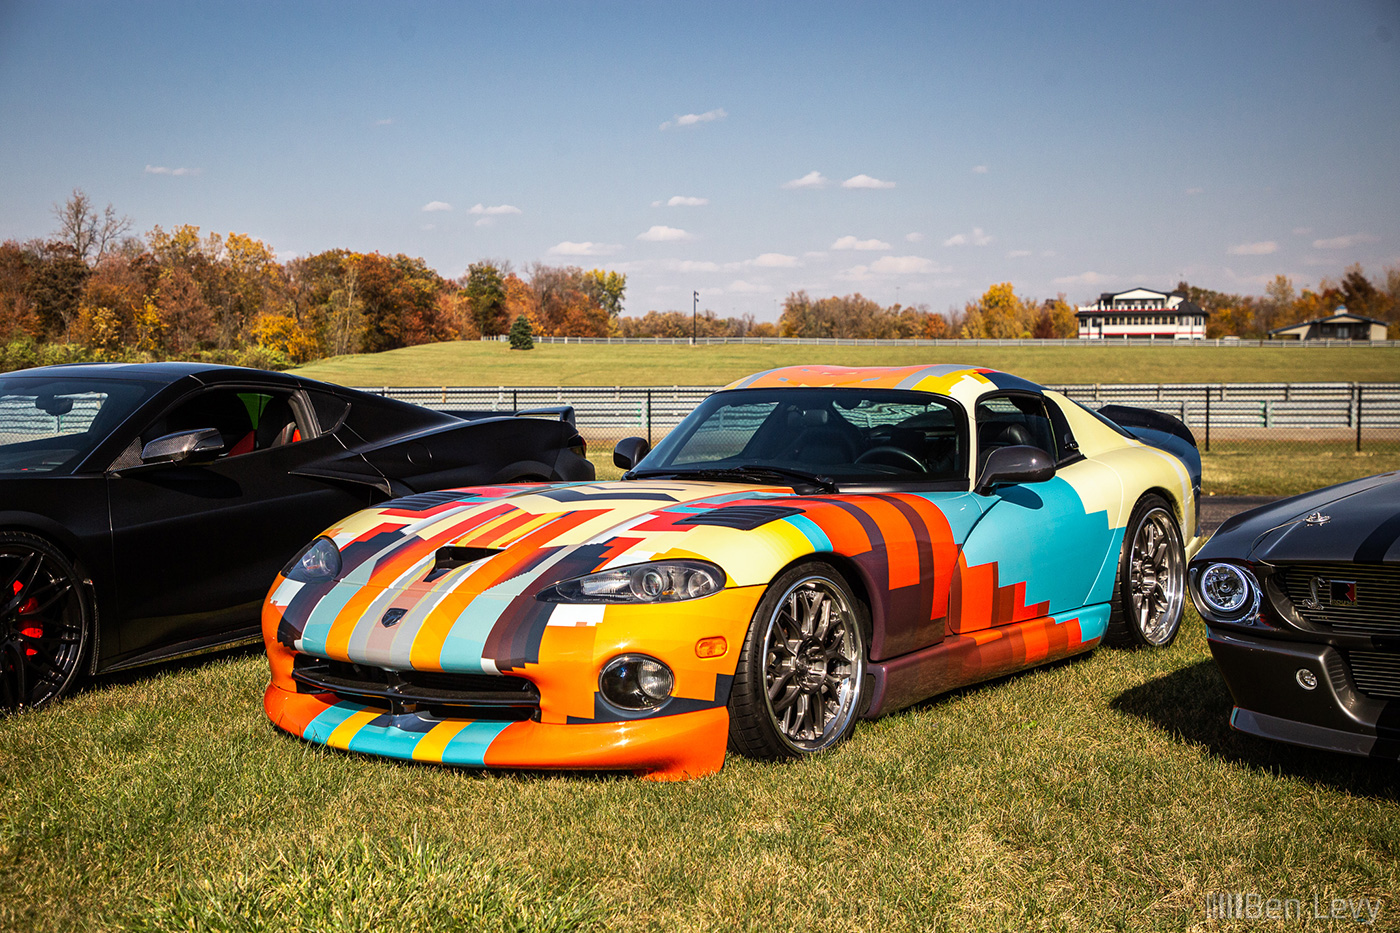 Viper Wins Best Wrap at Chicago Auto Pros Annual Car Show